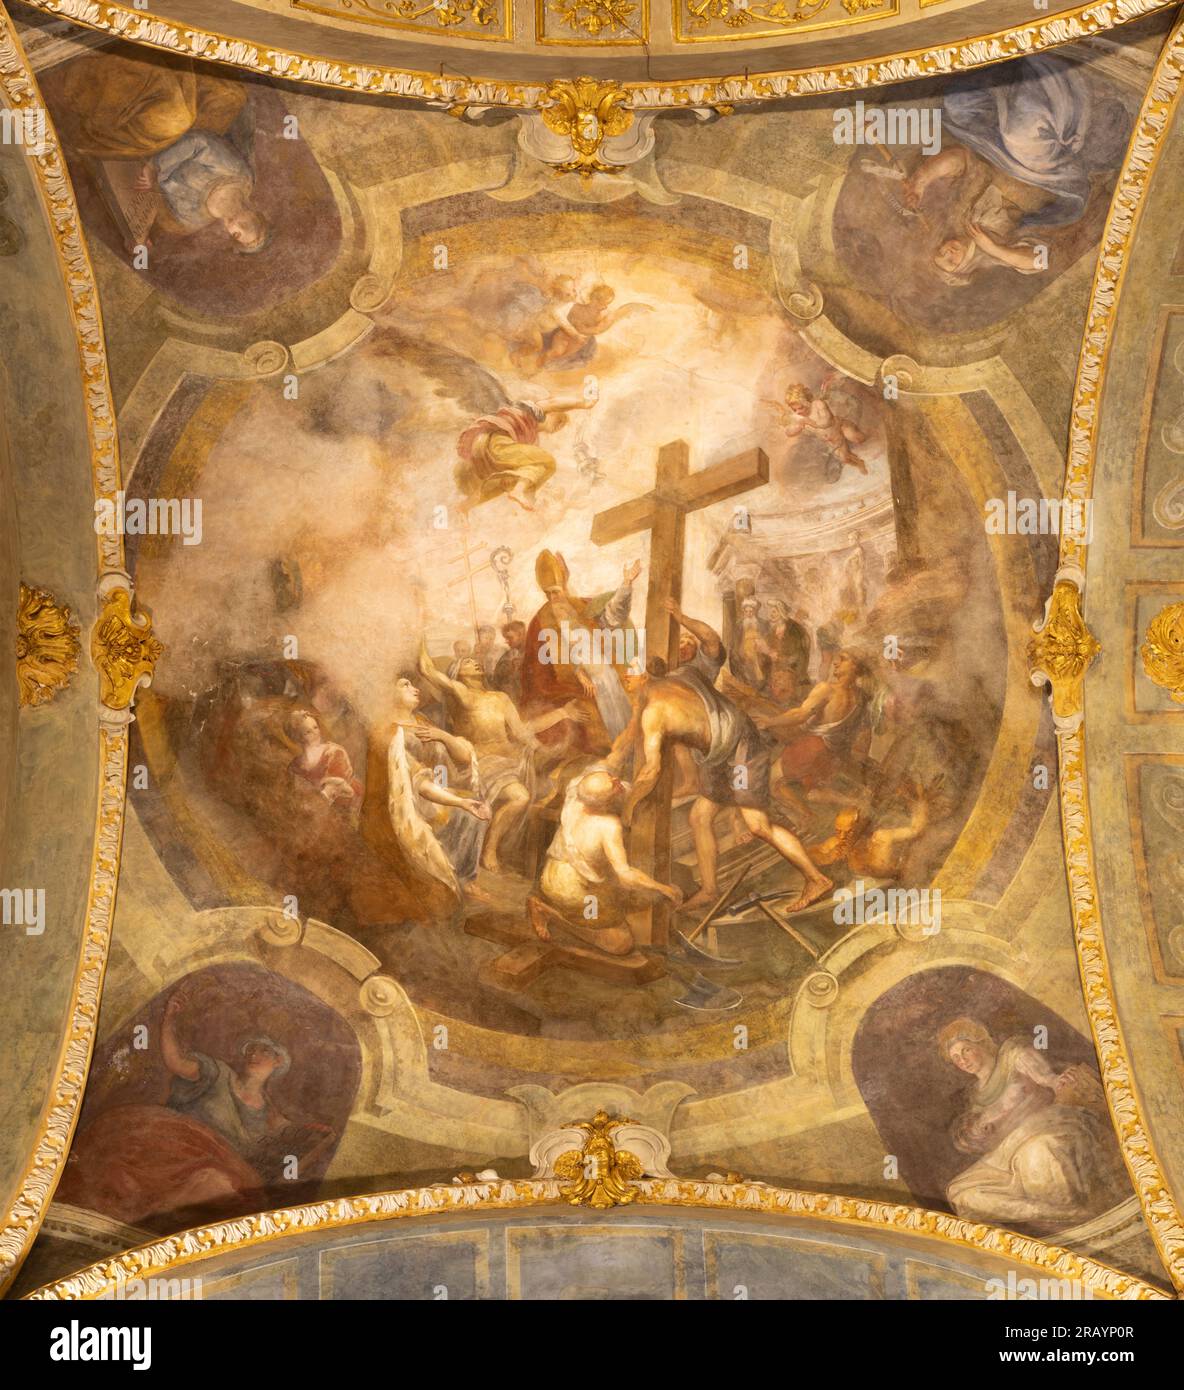 GENOVA, ITALY - MARCH 5, 2023: The fresco of The Finding of the Holy Cross in the side cupola of the church Basilica di Santa Maria delle Vigne Stock Photo